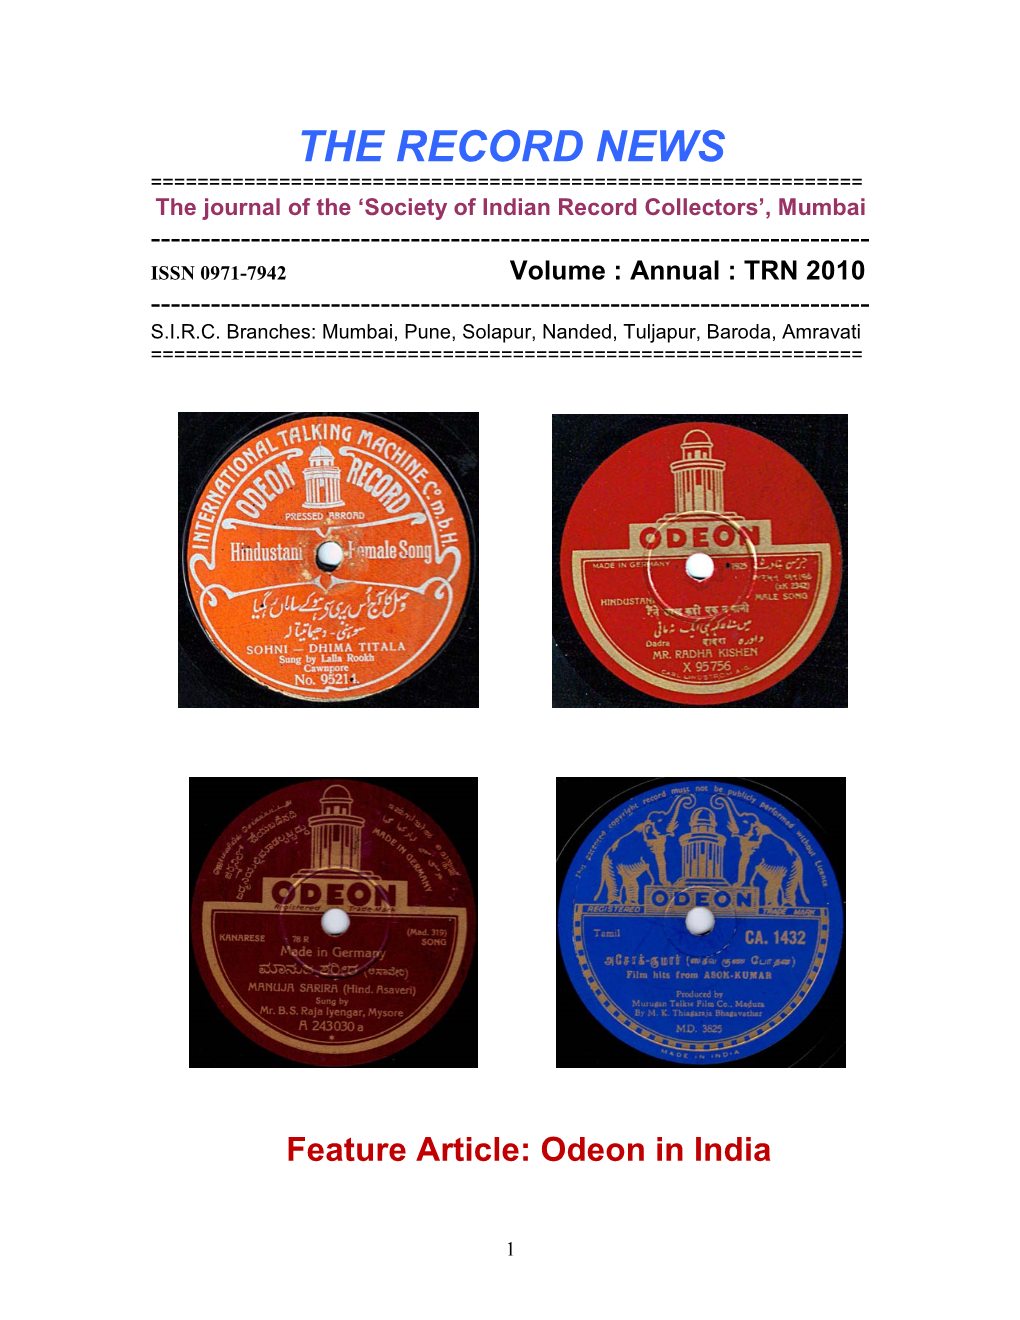 THE RECORD NEWS ======The Journal of the ‘Society of Indian Record Collectors’, Mumbai ------ISSN 0971-7942 Volume : Annual : TRN 2010 ------S.I.R.C